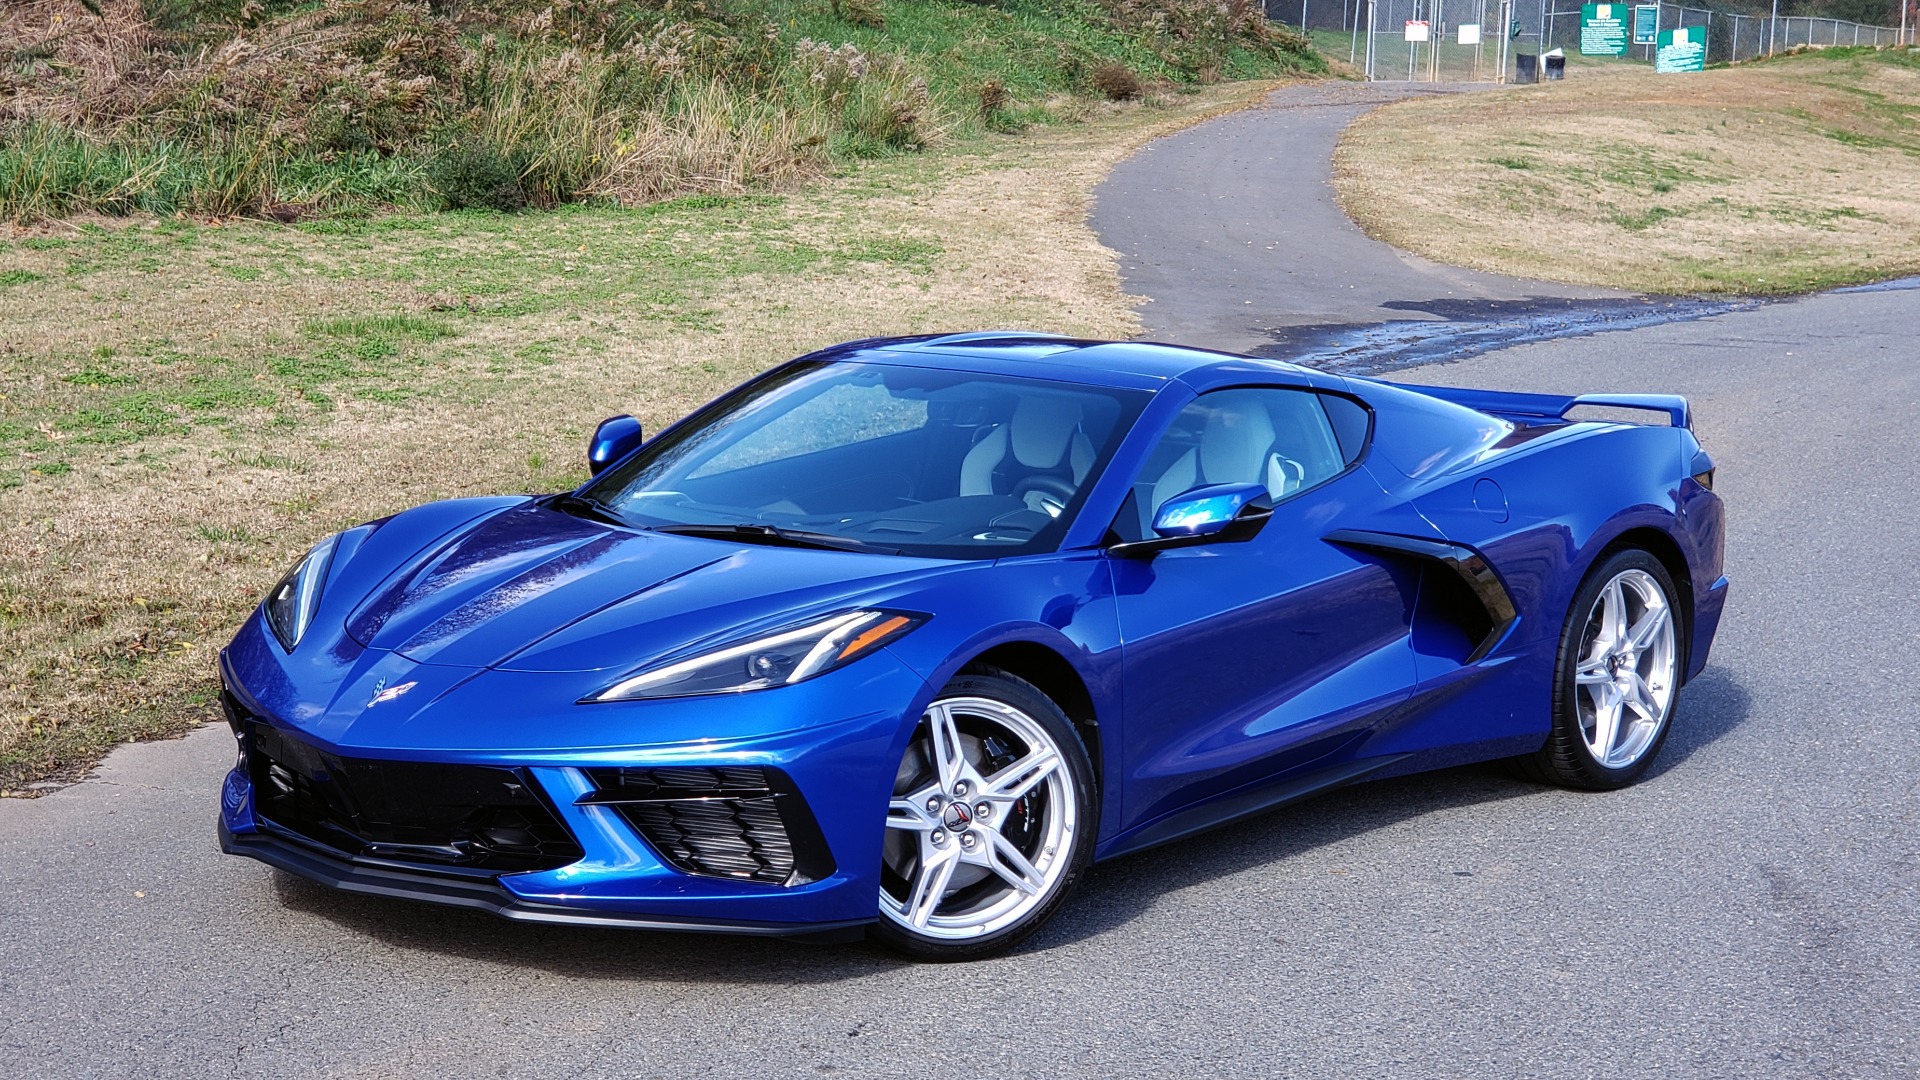 Used 2020 Chevrolet C8 CORVETTE STINGRAY 2LT COUPE / NAV / HUD / BOSE / GT2 SEATS / FRONT LIFT / REARVIEW for sale Sold at Formula Imports in Charlotte NC 28227 4